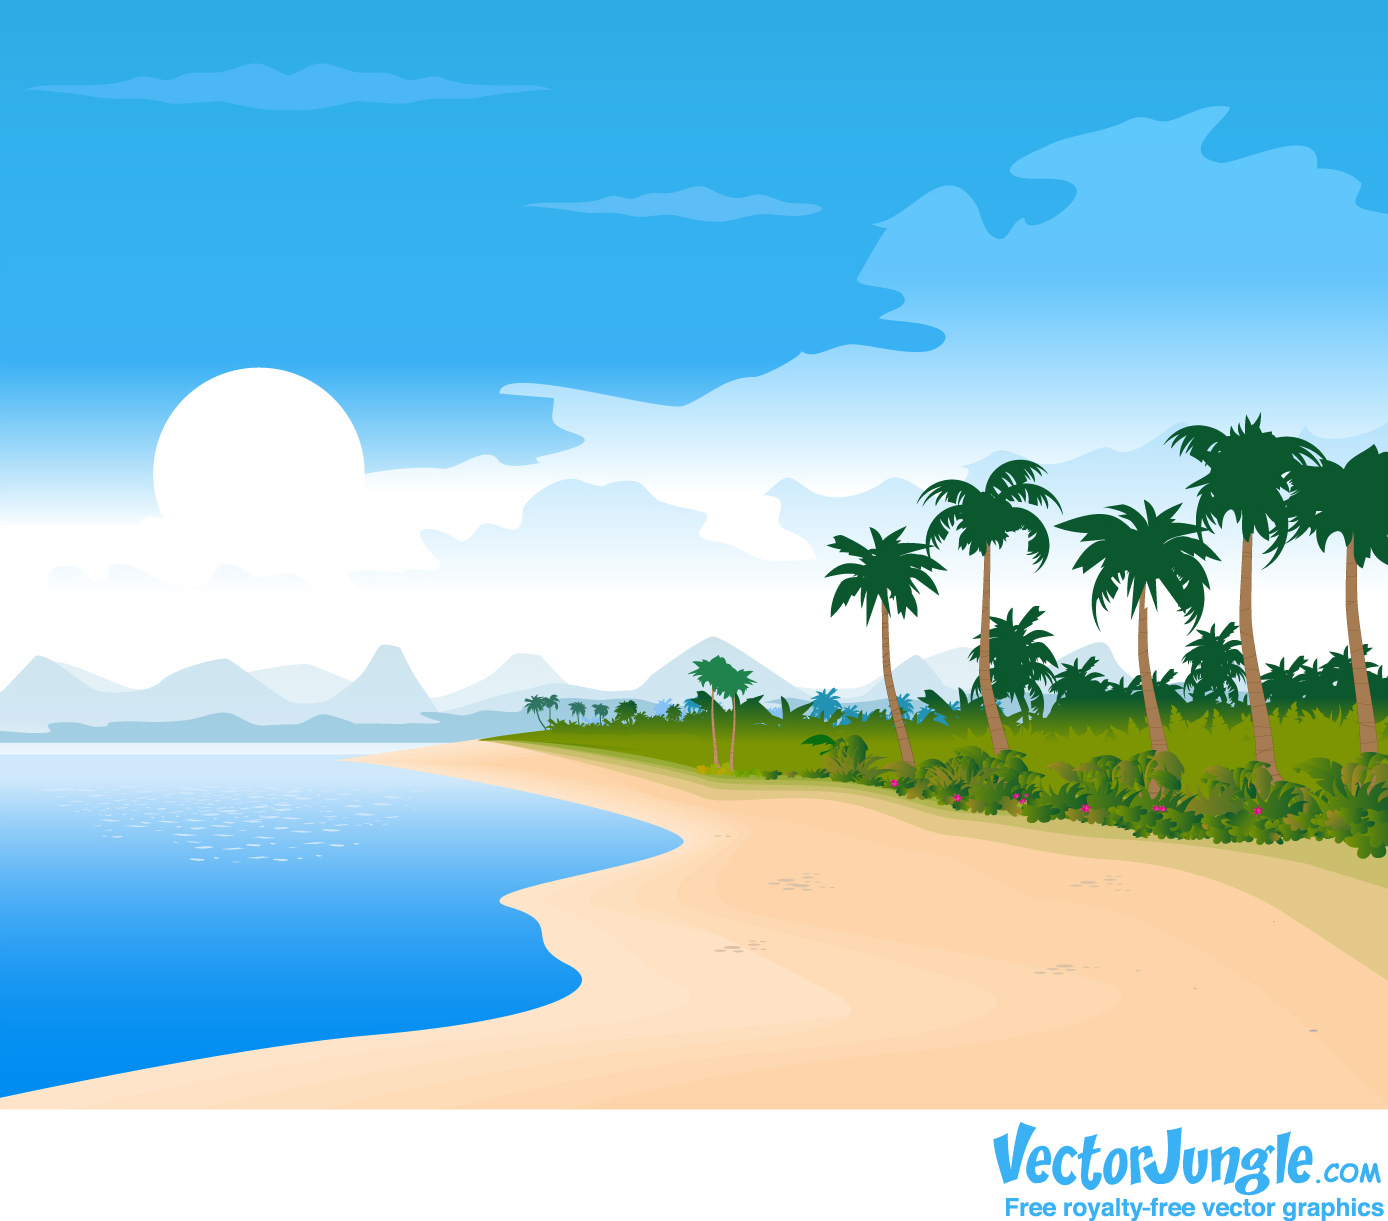 Download Cartoon Beach Wallpaper In High Resolution For Free High